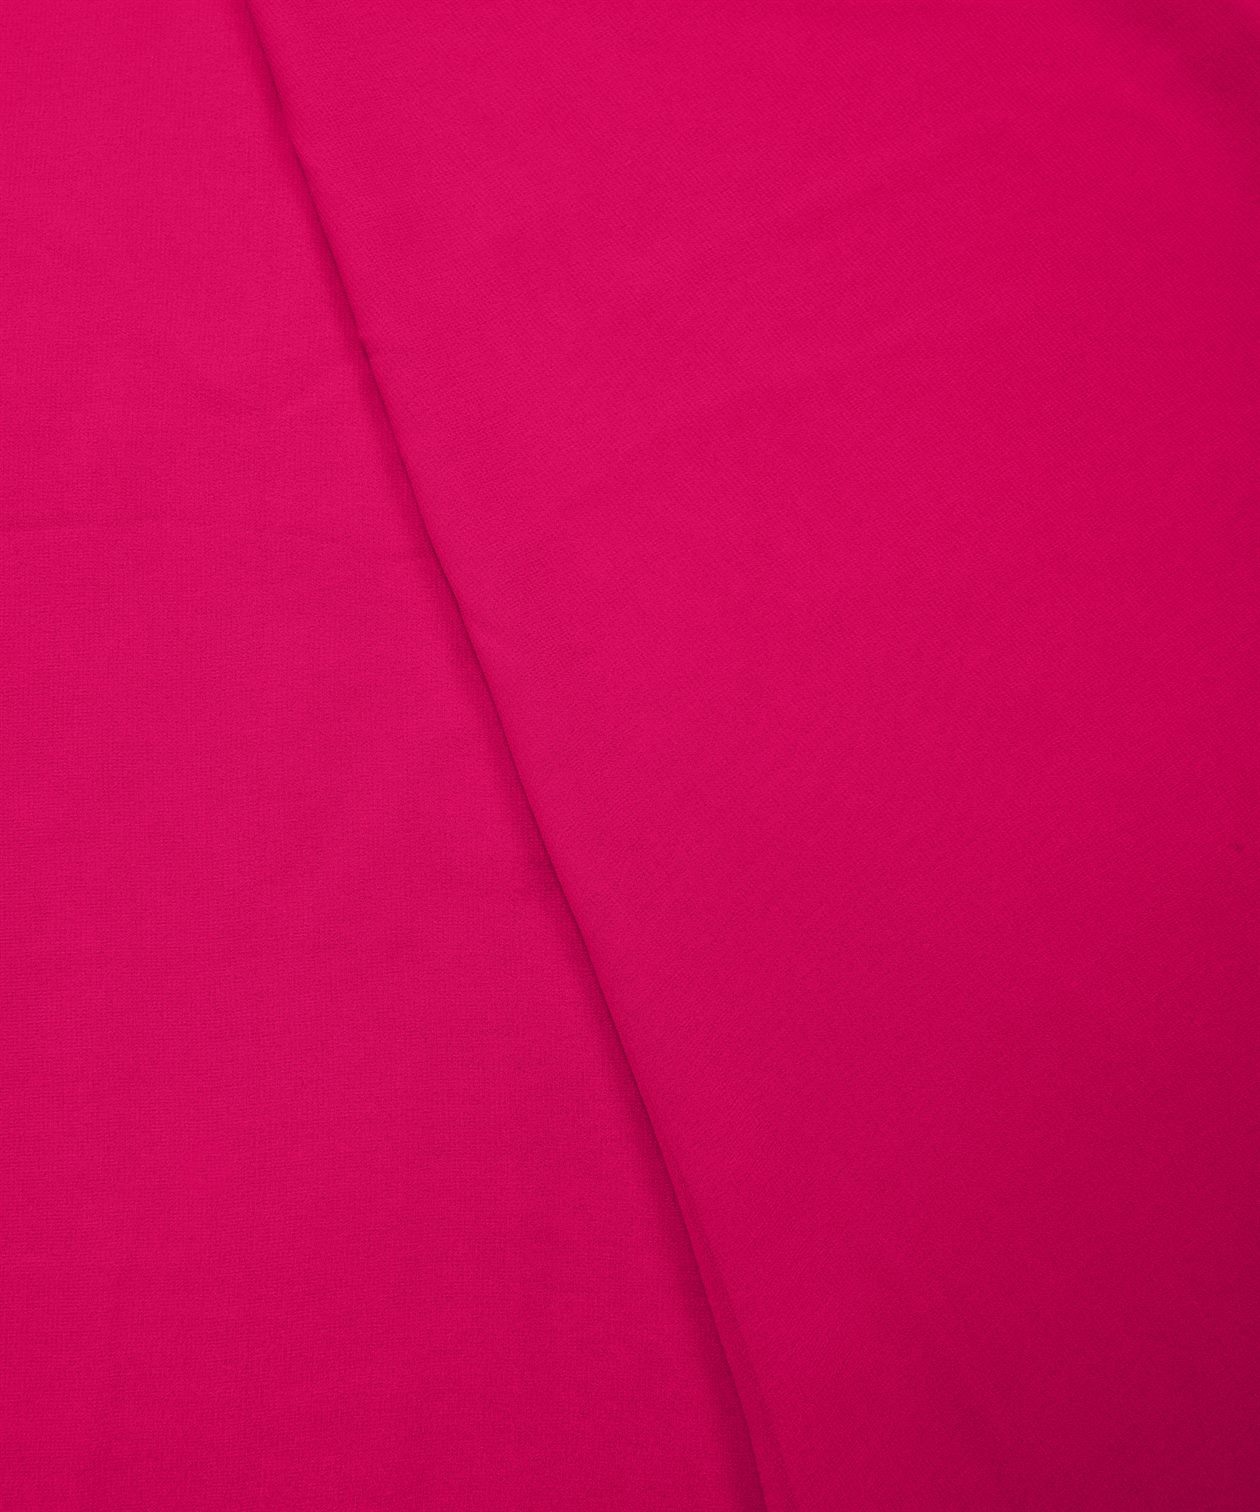 Hot Pink Plain Dyed Georgette (60 Grams) Fabric